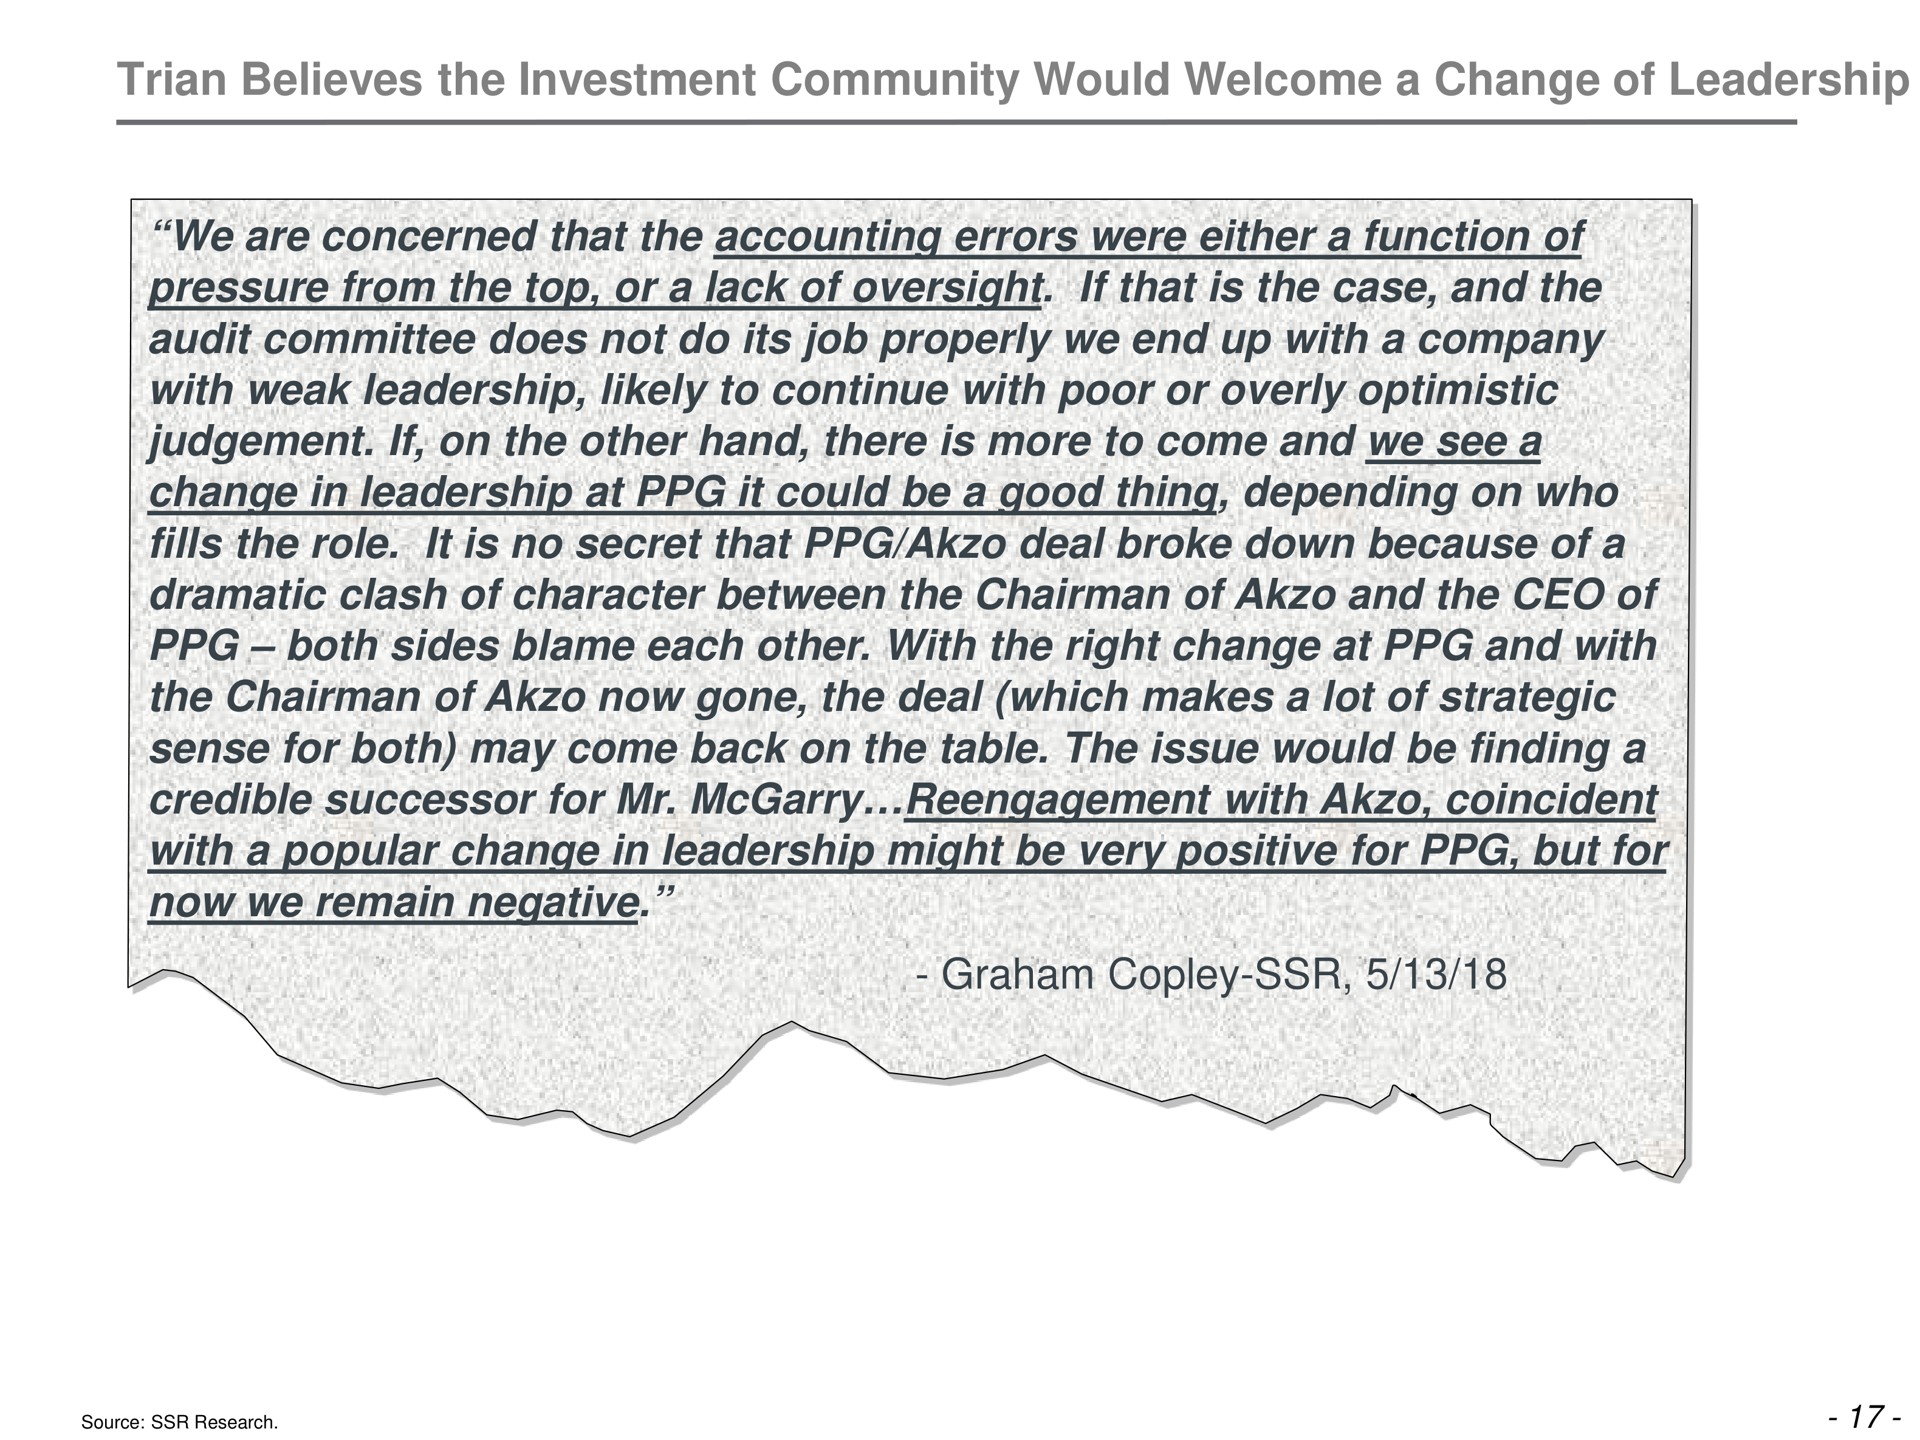 believes the investment community would welcome a change of leadership we are concerned that the accounting errors were either a function of pressure from the top or a lack of oversight if that is the case and the audit committee does not do its job properly we end up with a company with weak leadership likely to continue with poor or overly optimistic if on the other hand there is more to come and we see a change in leadership at it could be a good thing depending on who fills the role it is no secret that deal broke down because of a dramatic clash of character between the chairman of and the of both sides blame each other with the right change at and with the chairman of now gone the deal which makes a lot of strategic sense for both may come back on the table the issue would be finding a credible successor for with coincident with a popular change in leadership might be very positive for but for now we remain negative graham | Trian Partners